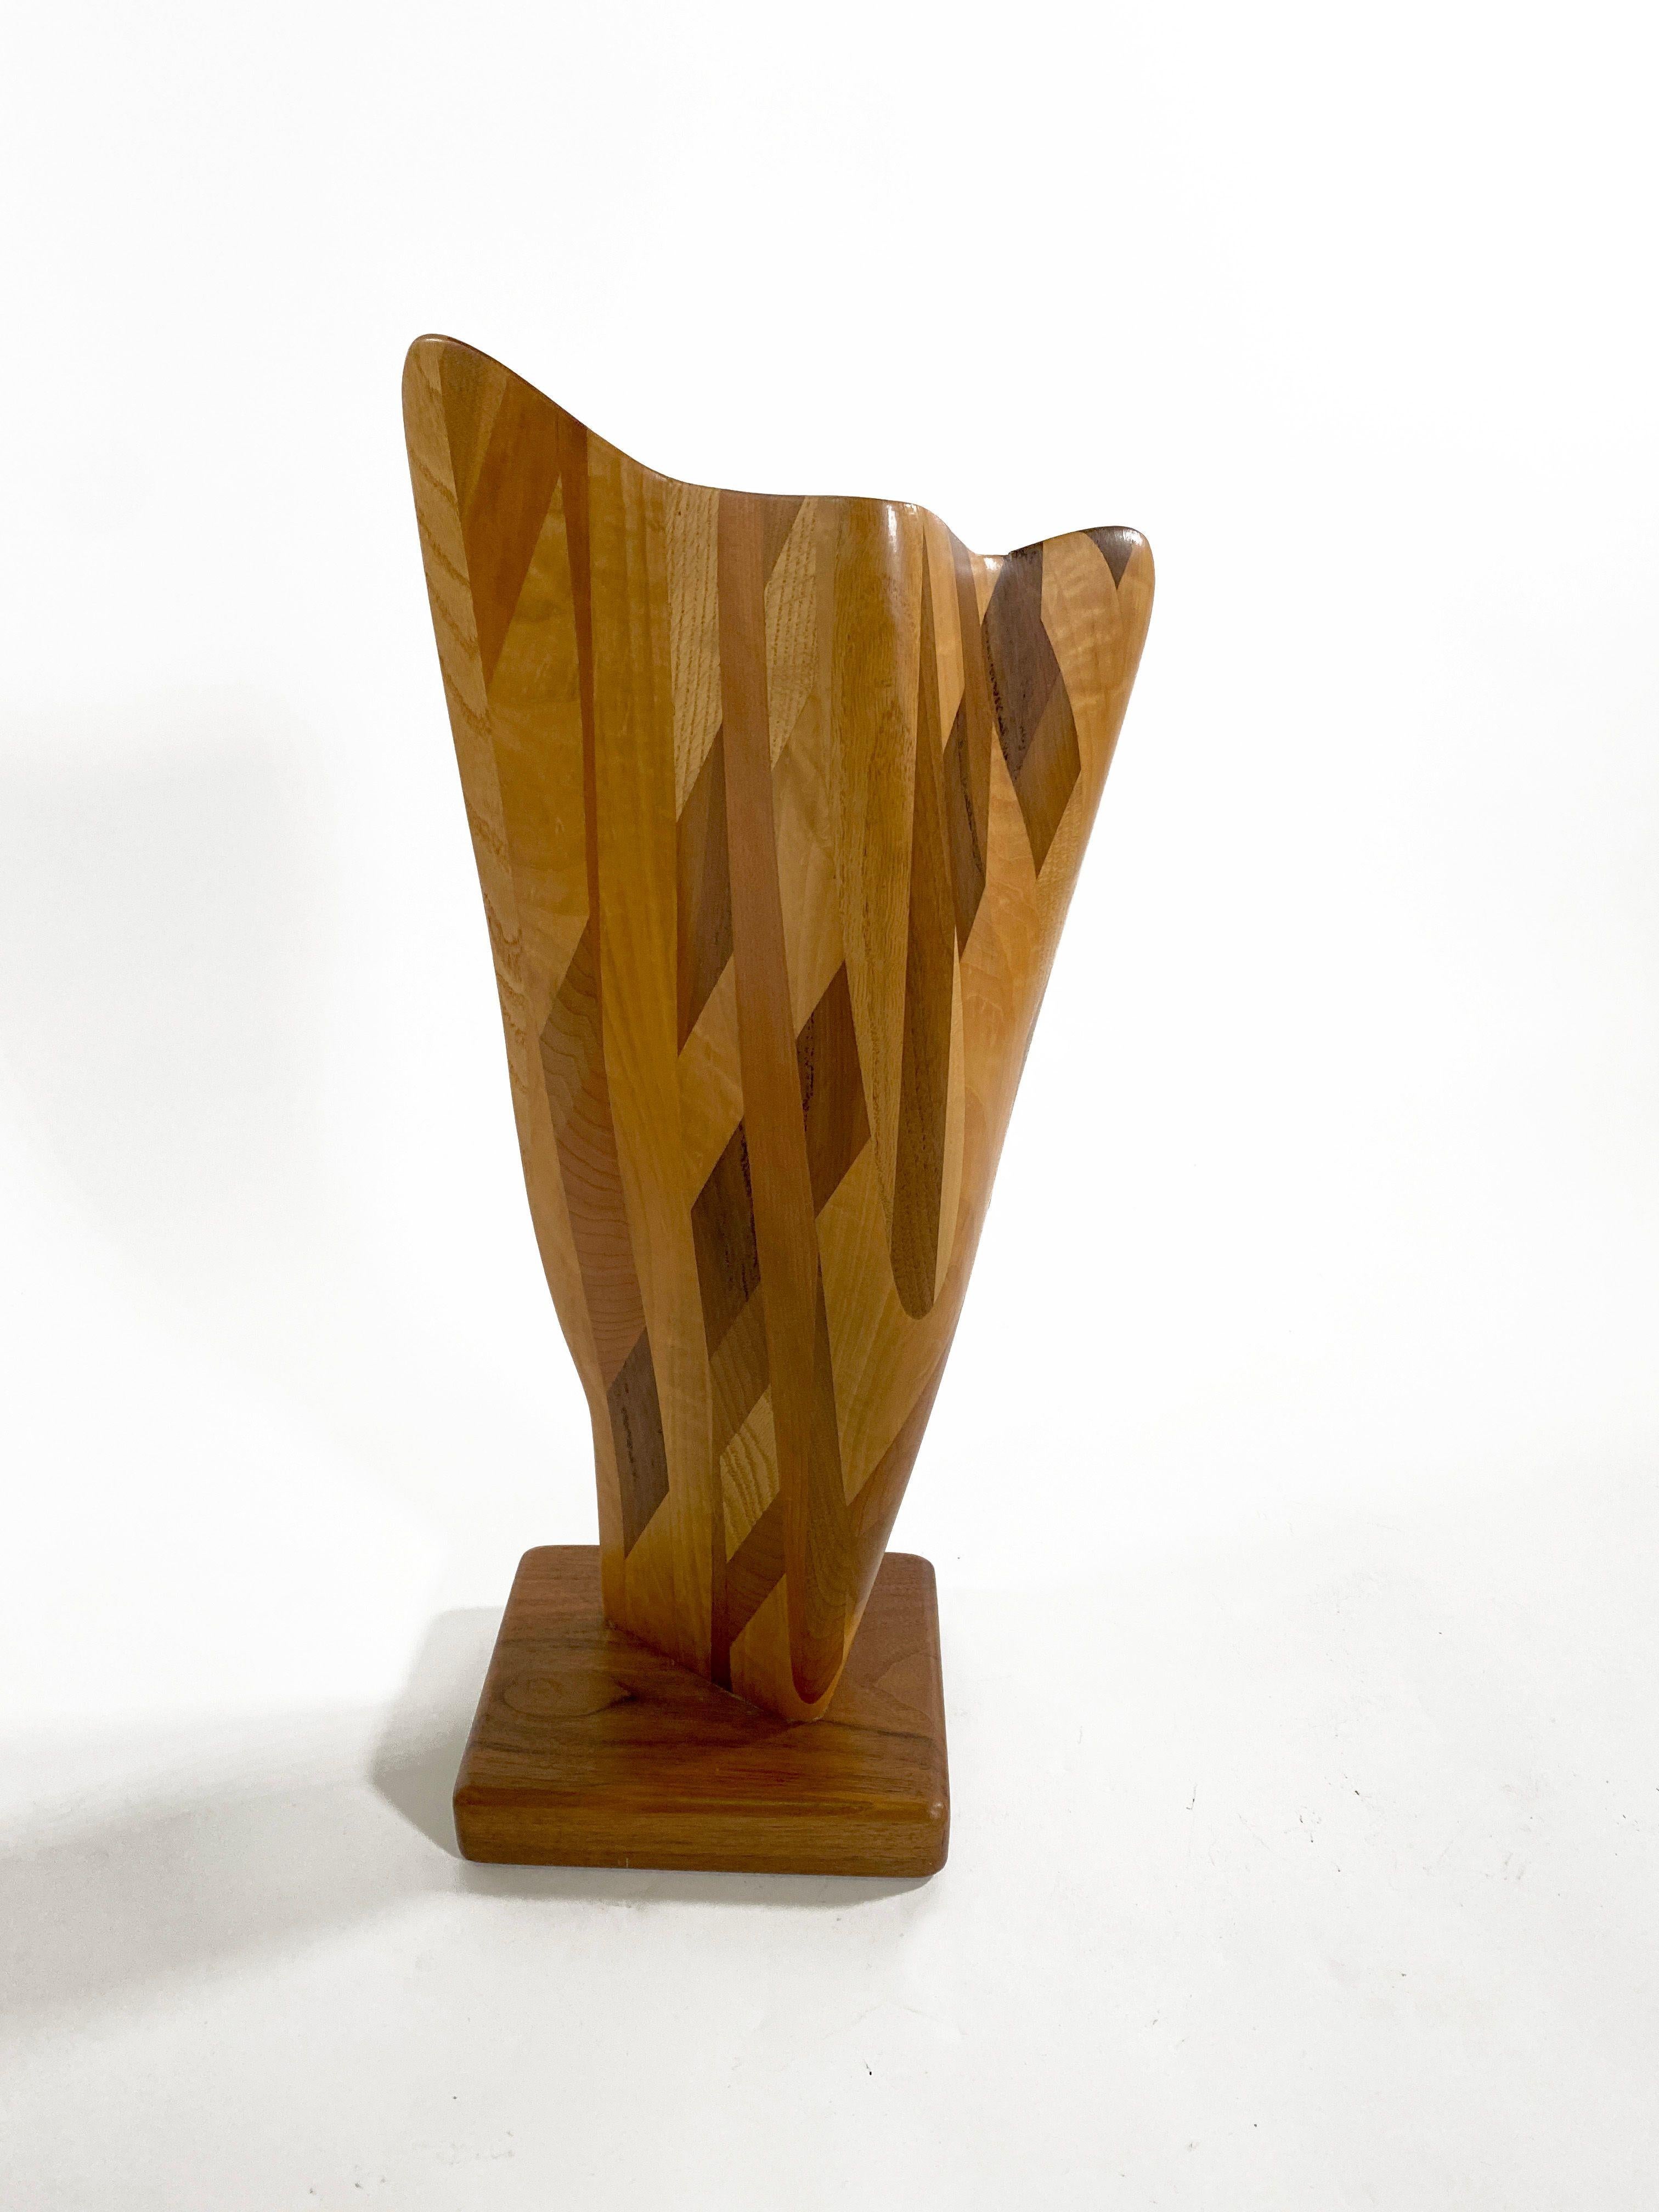 Set of 3 American Modern Abstract Mixed Exotic Wood Sculptures, Paul LaMontagne For Sale 1